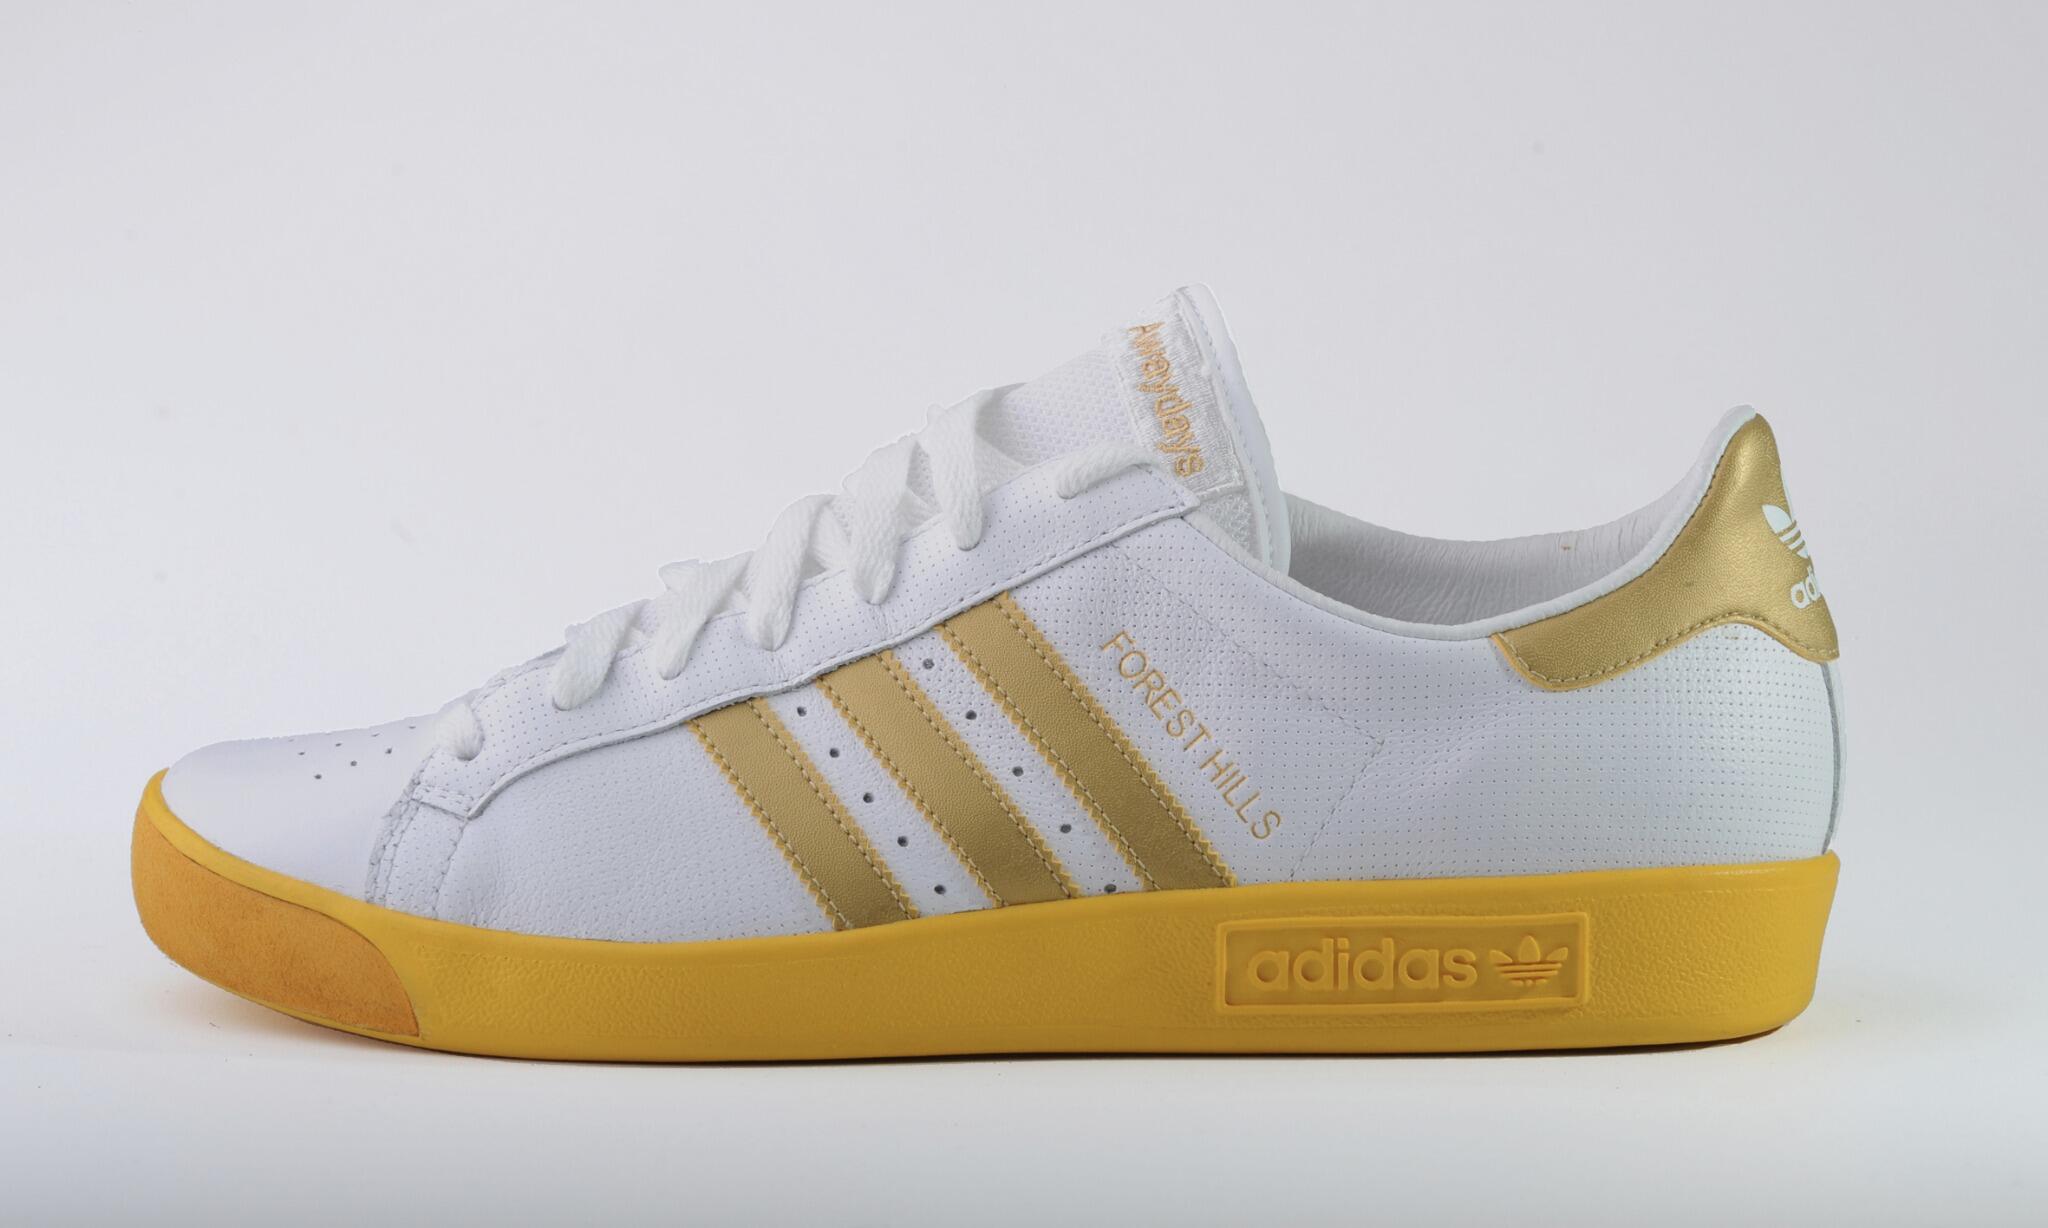 adidas UK Twitter: "These limited edition Forrest Hills produced for the film Awaydays. Only 100 made! Anyone got a pair? #spezial http://t.co/gN13ZhCYYS" / Twitter